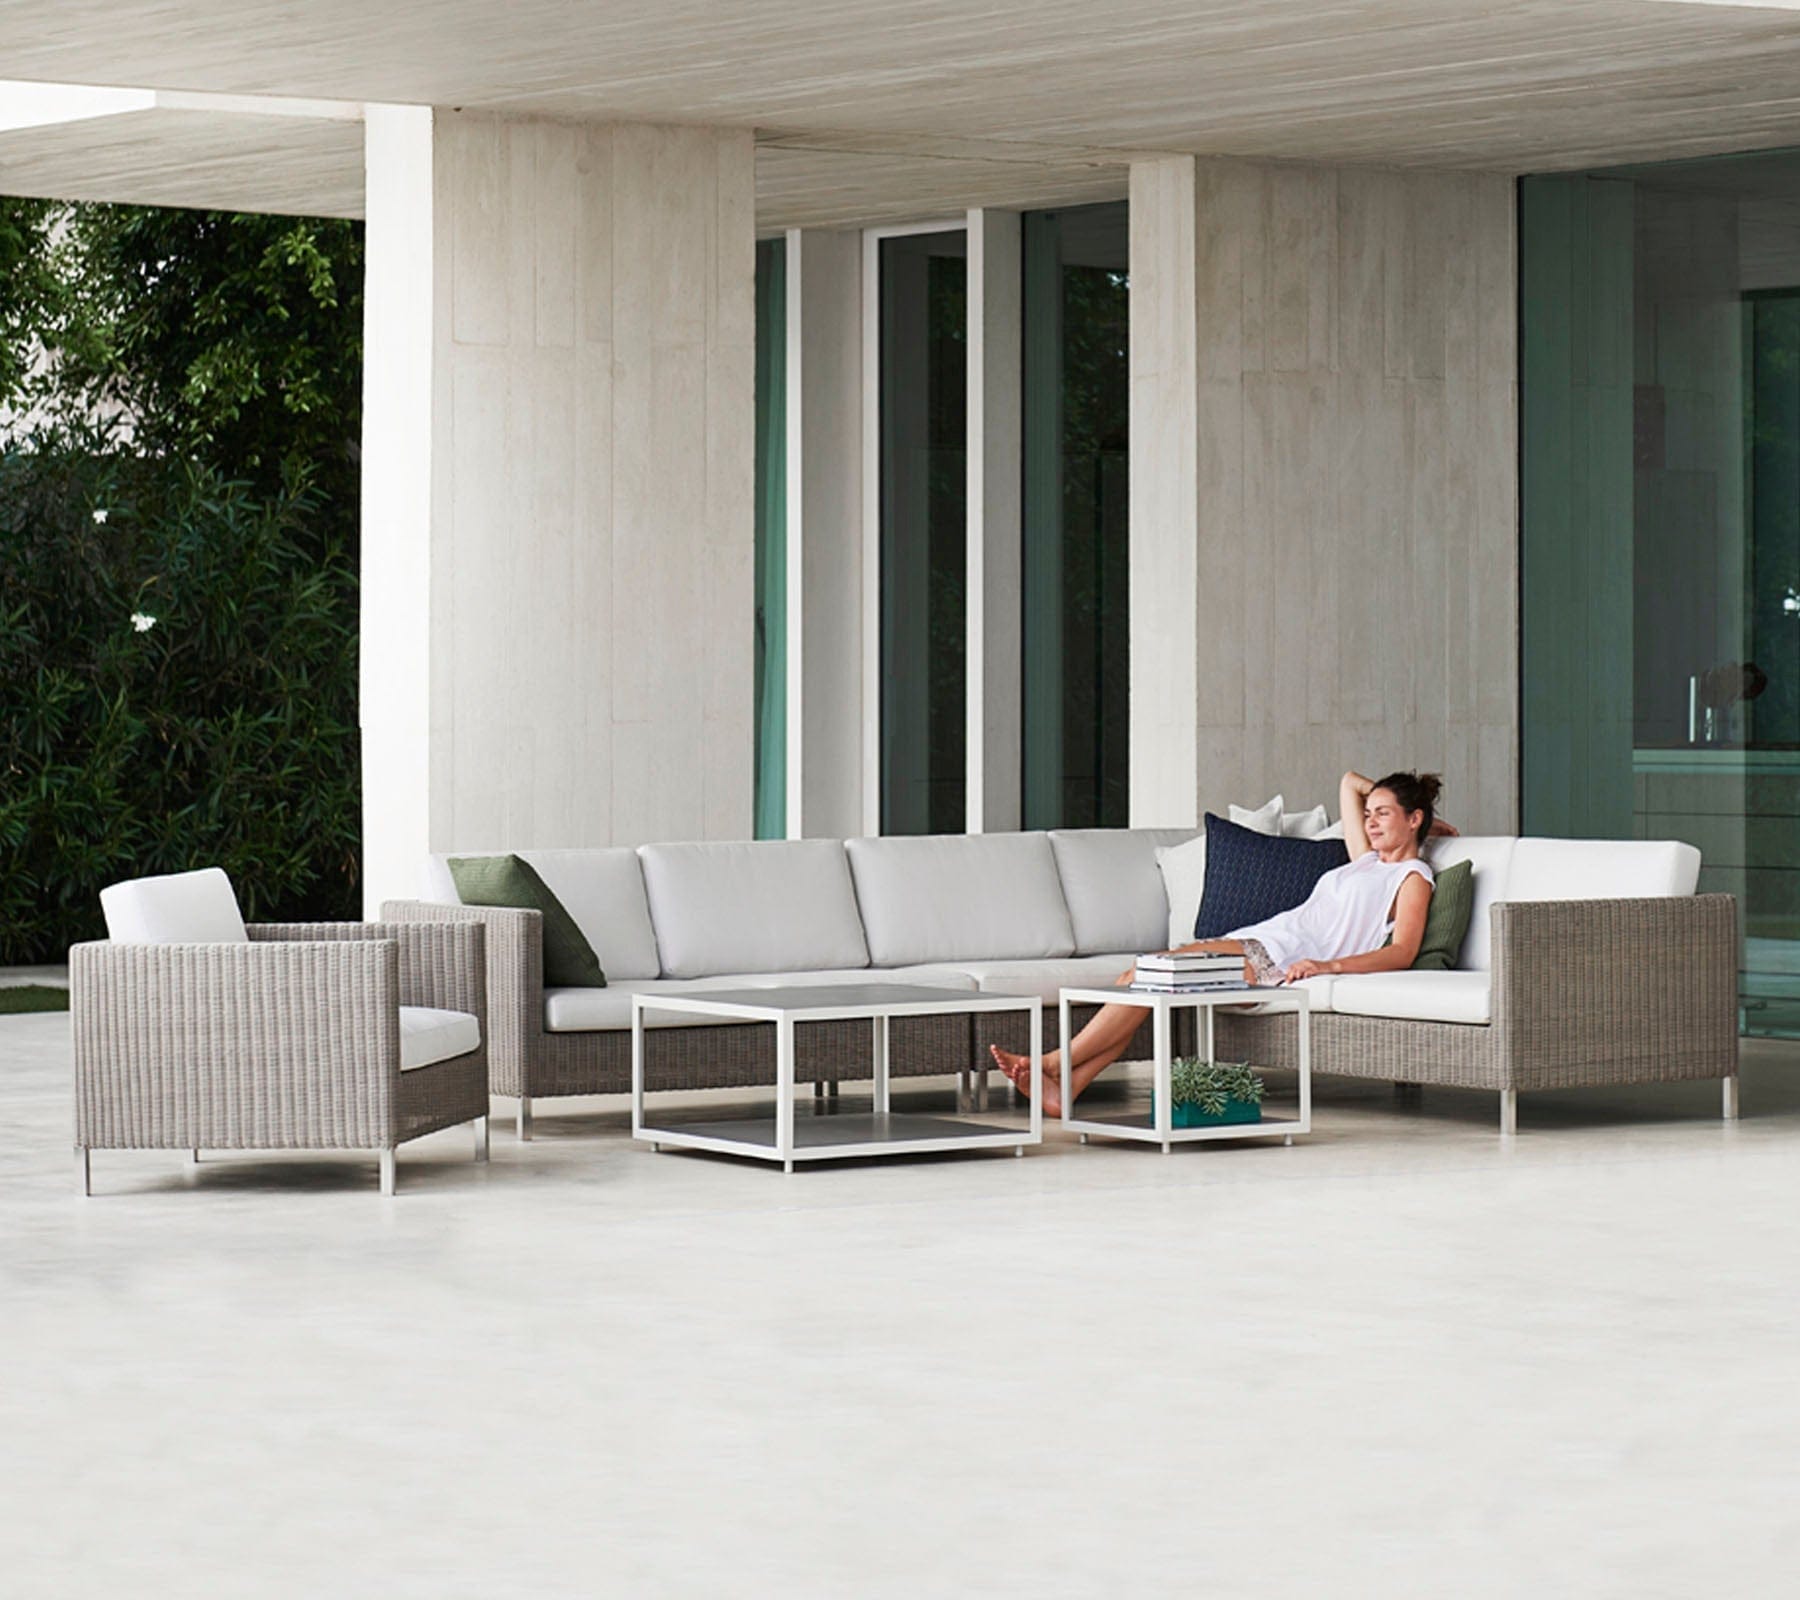 Boxhill's Connect Corner Sofa lifestyle image at patio with a woman sitting down